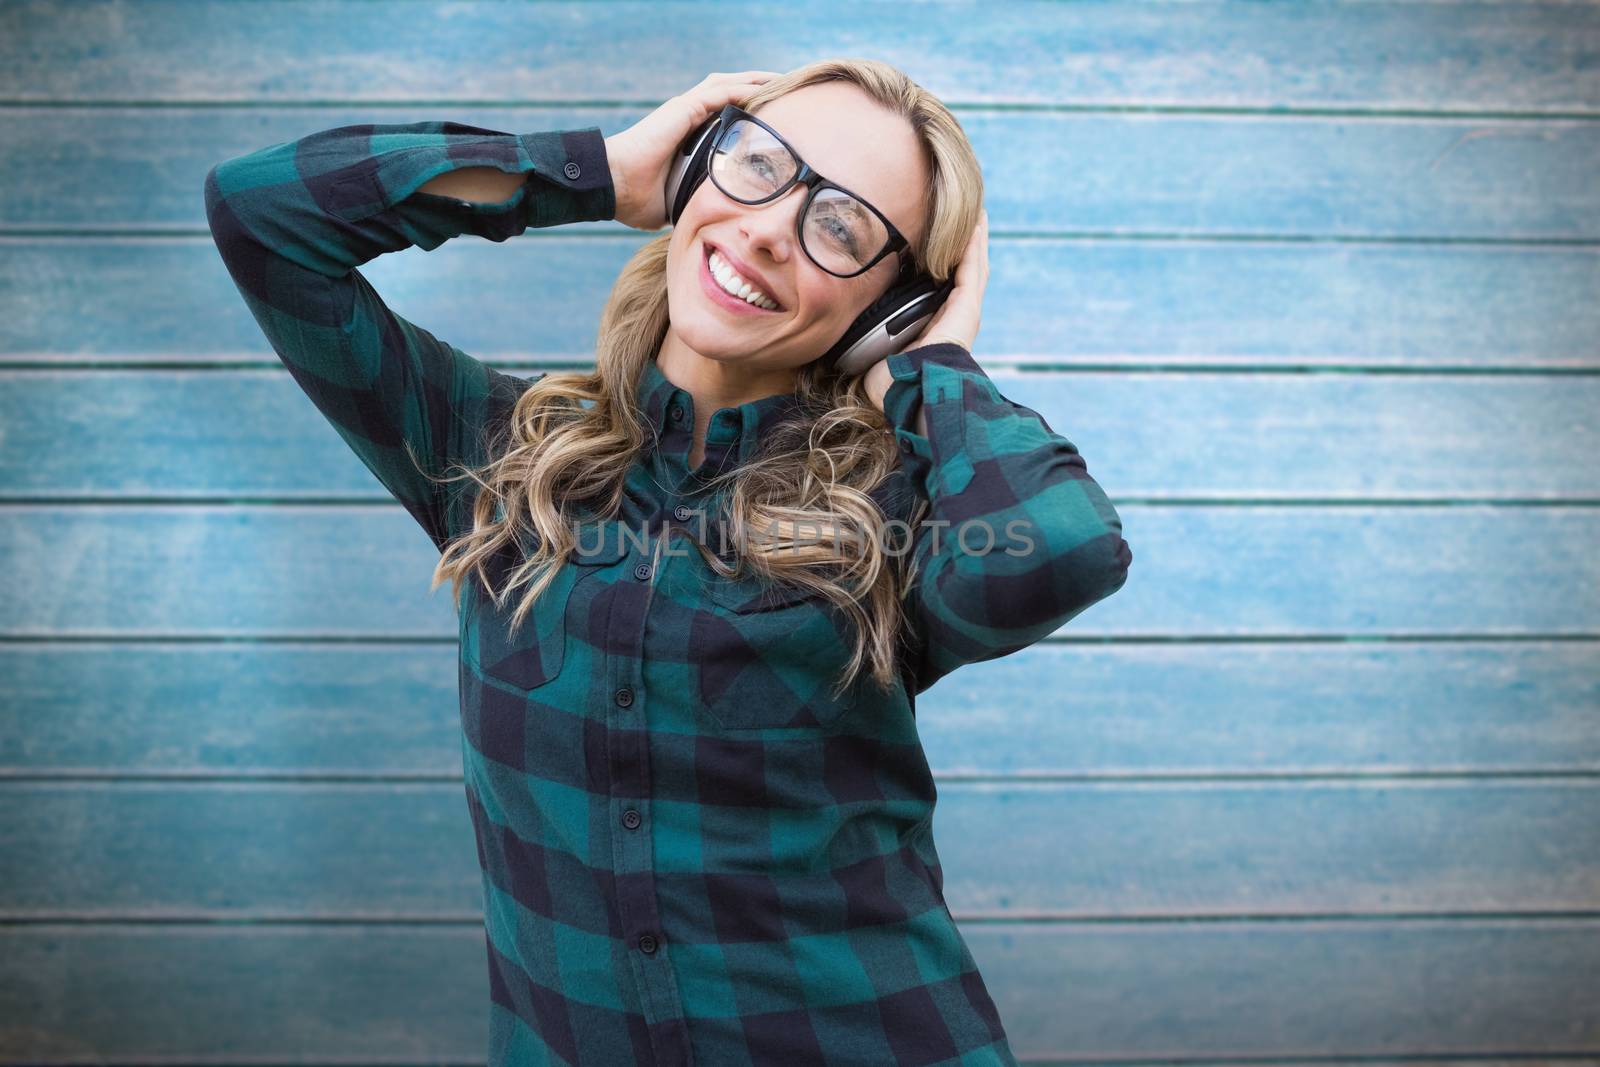 Pretty blonde listening to music against wooden planks